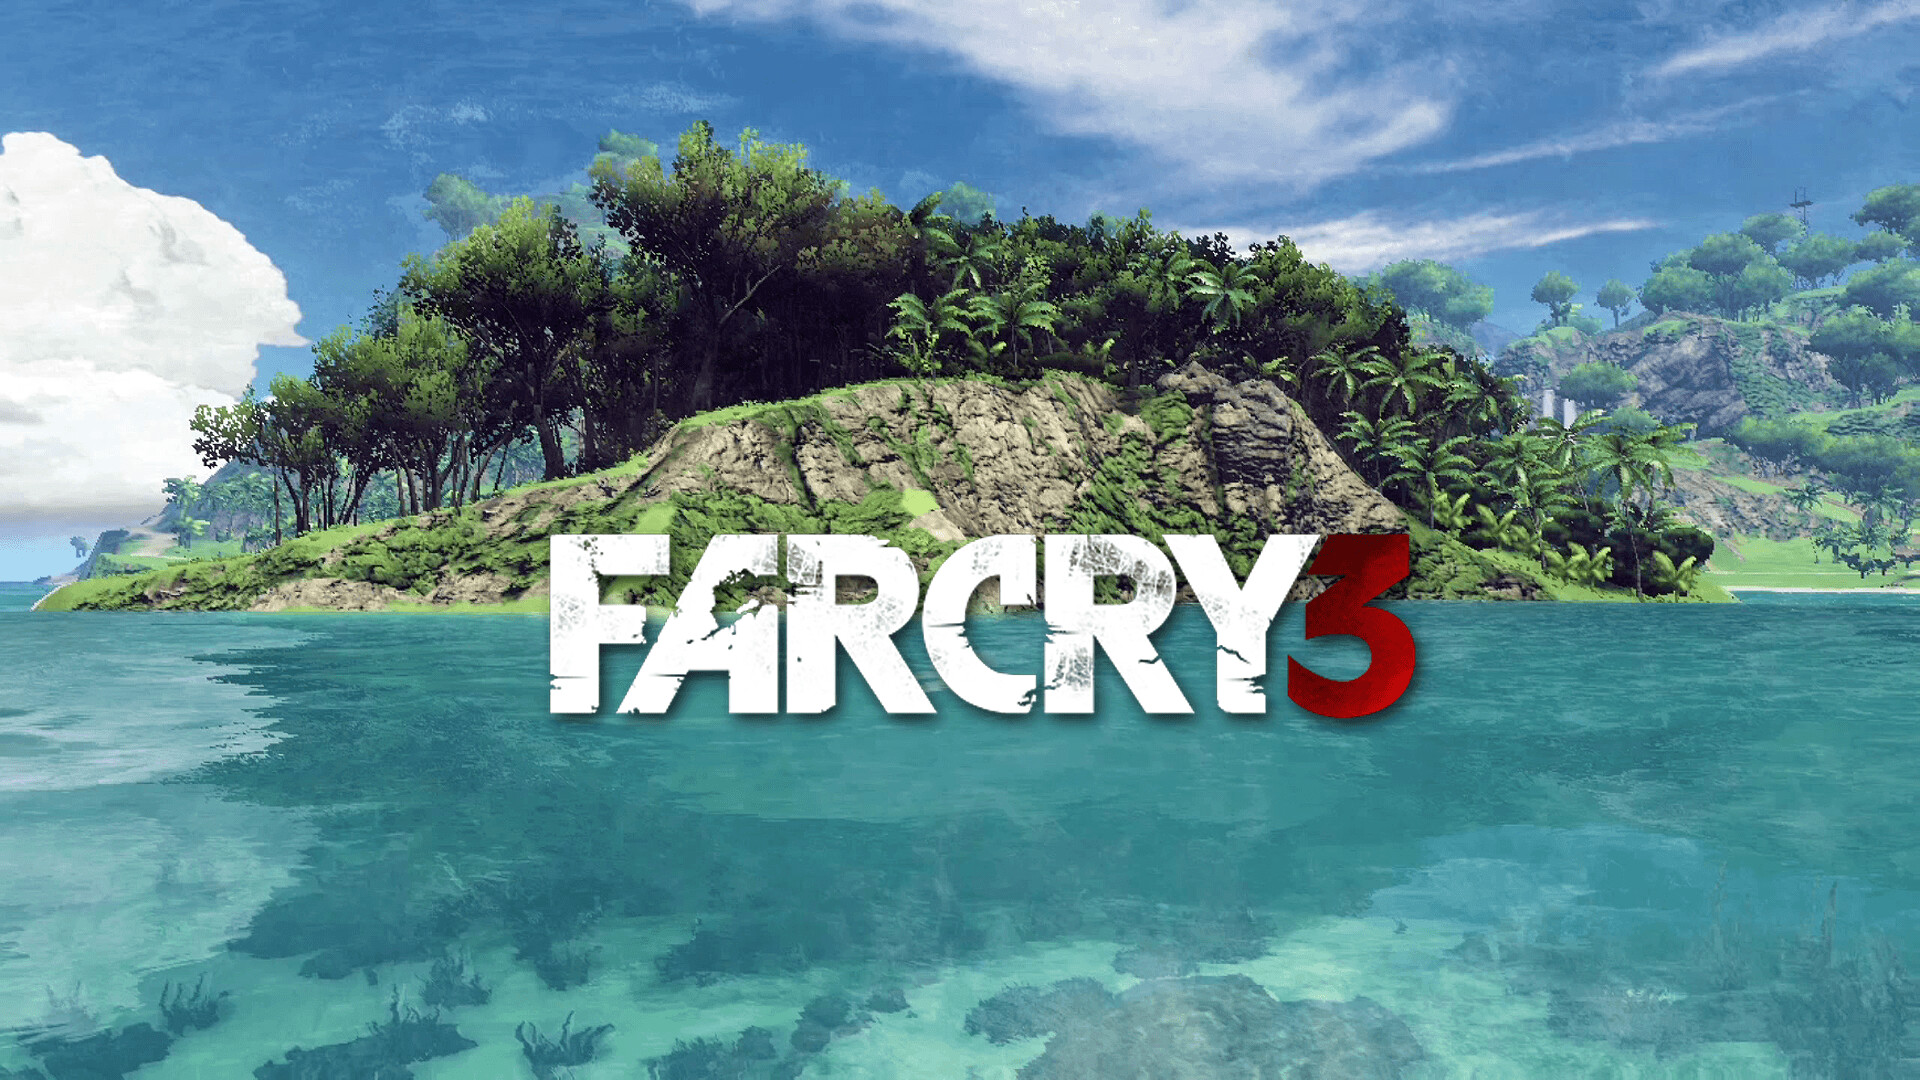 Far Cry 3: An open world first-person shooter set on the fictional Rook archipelago in the Pacific. 1920x1080 Full HD Background.